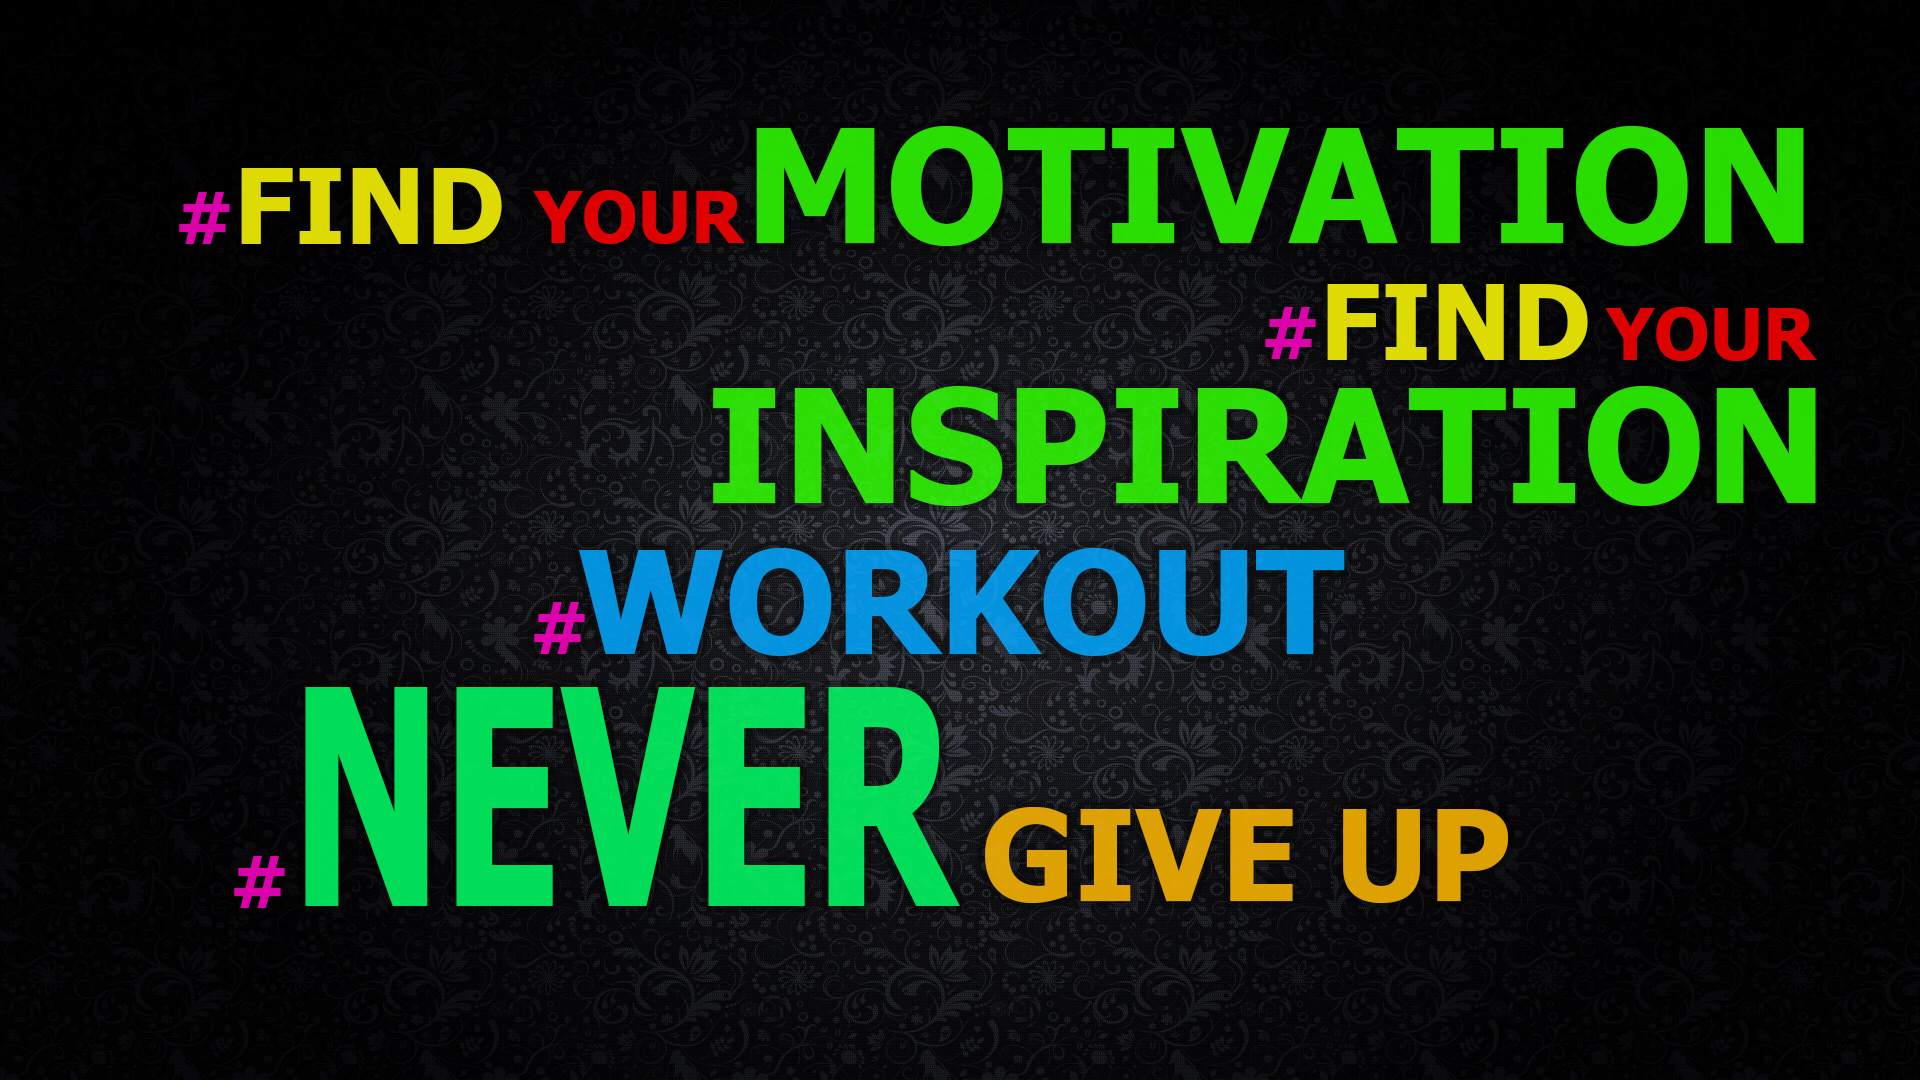 Motivational Exercising Never Give Up Text Typography 1920x1080